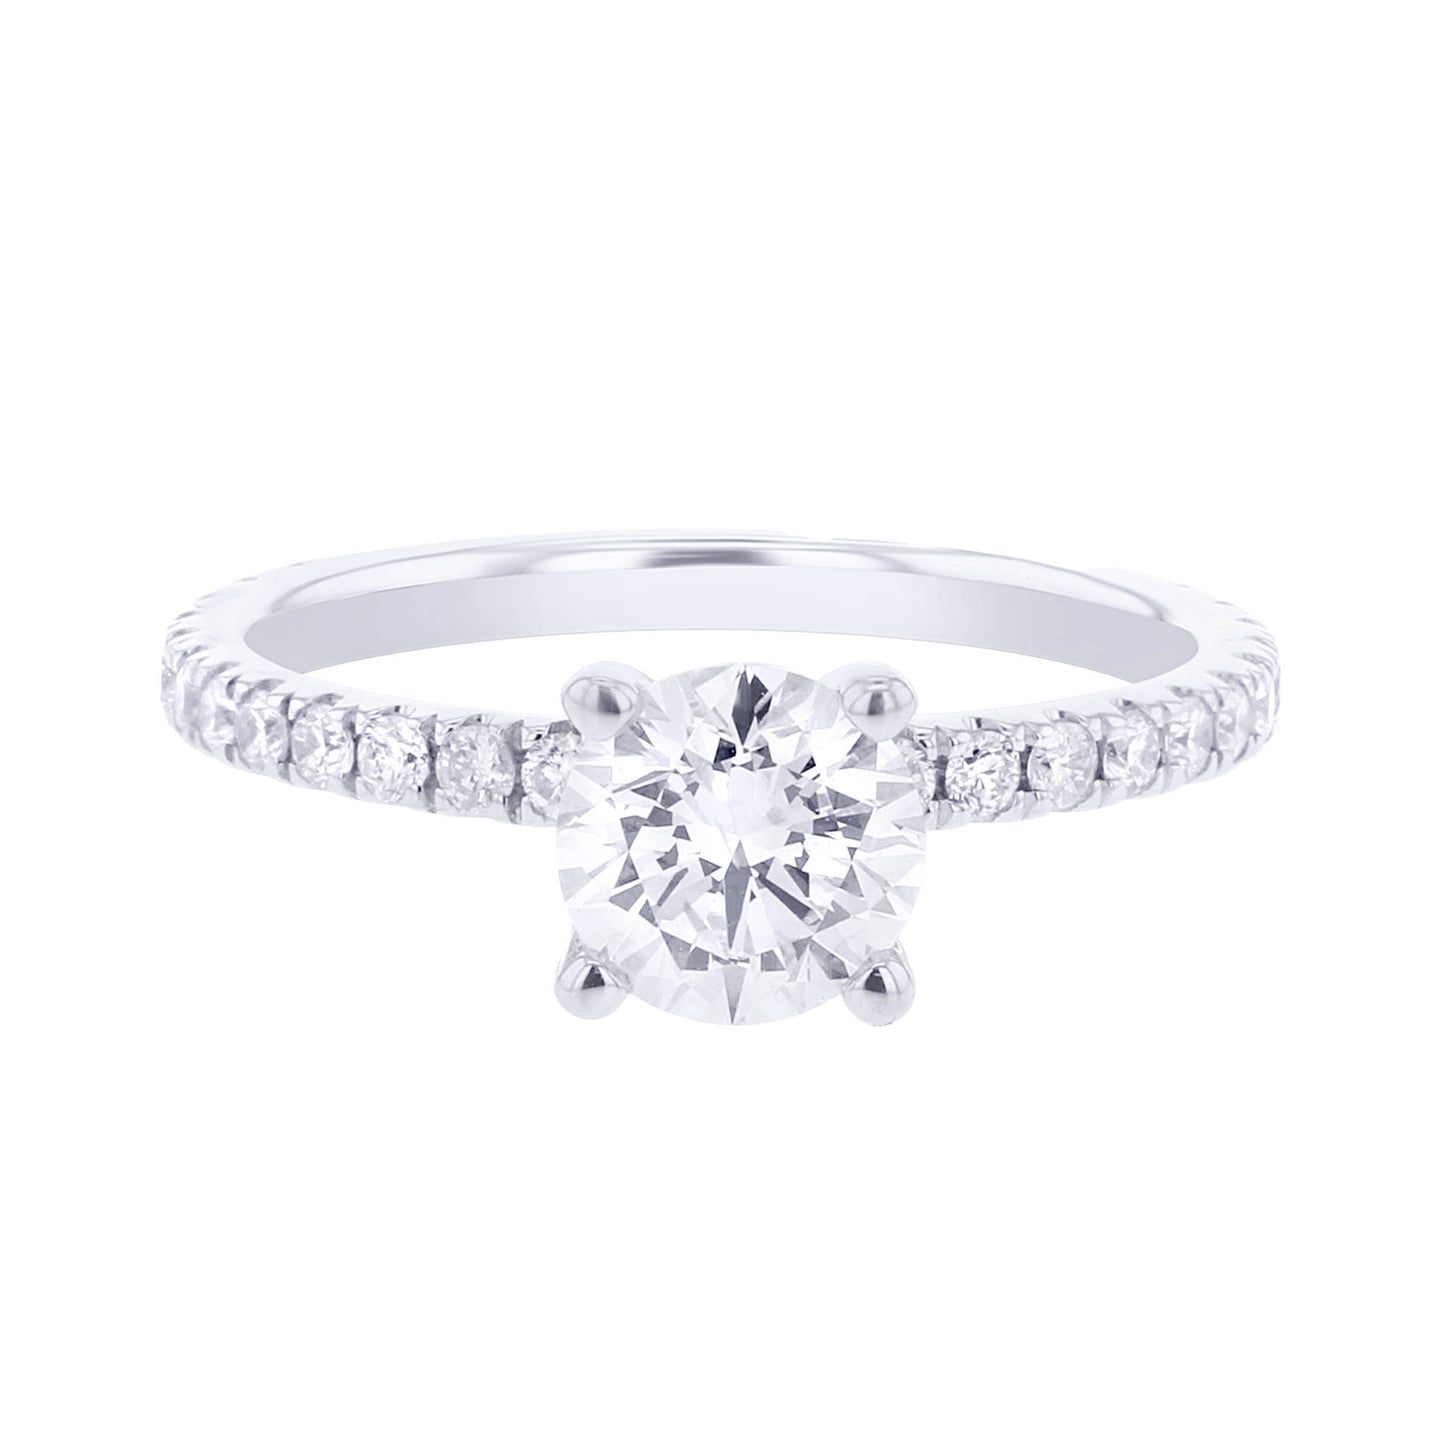 Lorena Ready for Love Diamond Engagement Ring 1 1/3ct